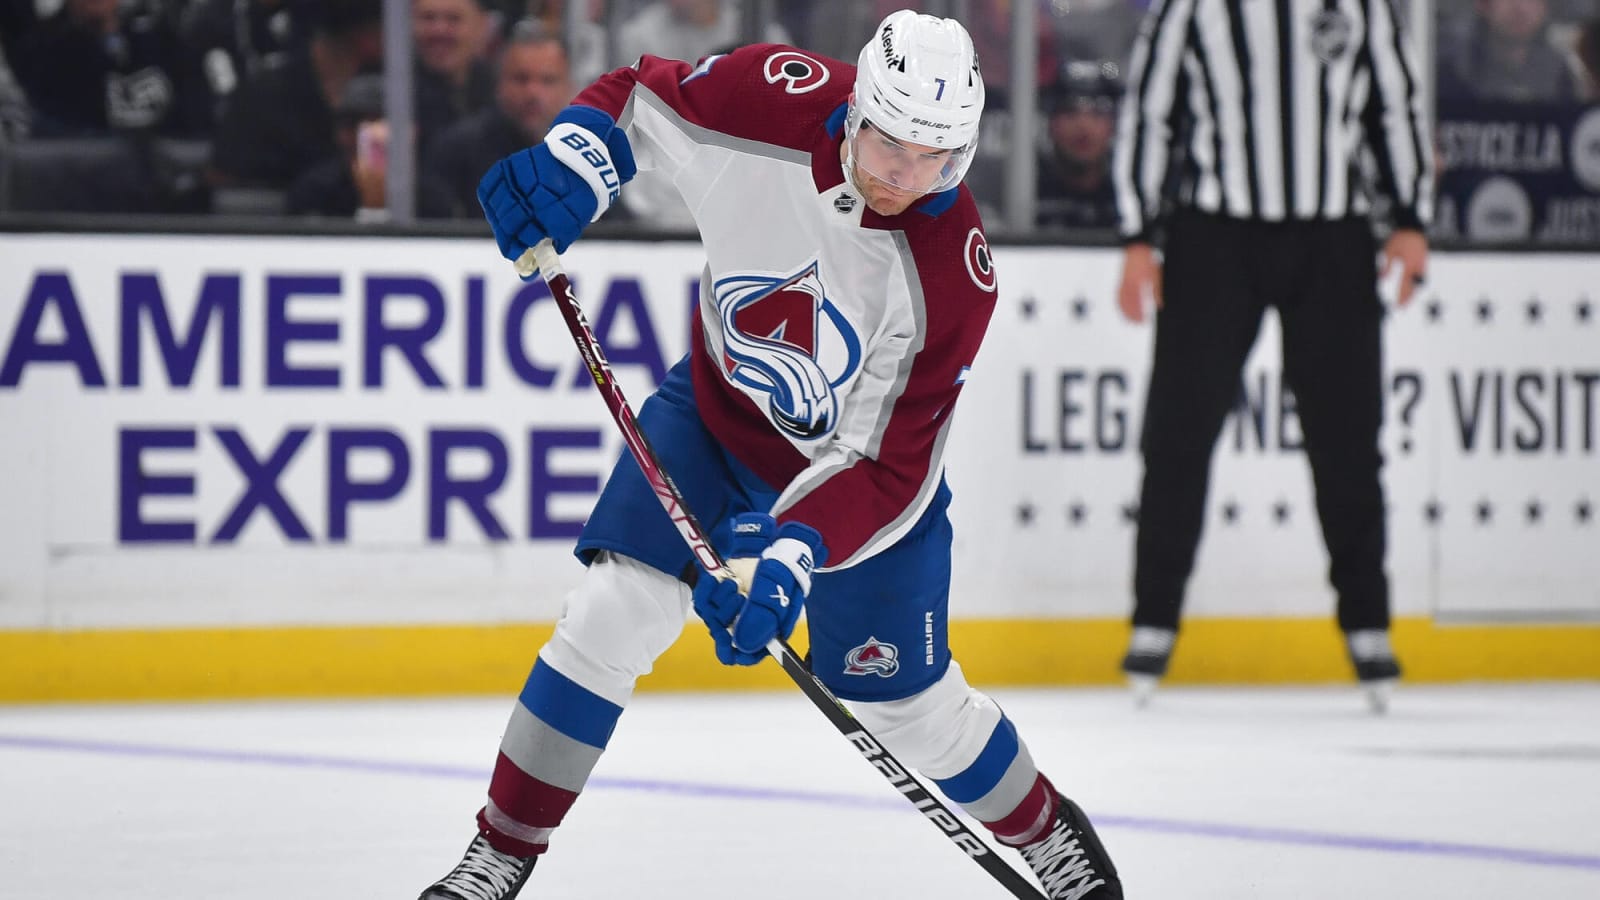 Avalanche’s Toews Gets Team’s Attention